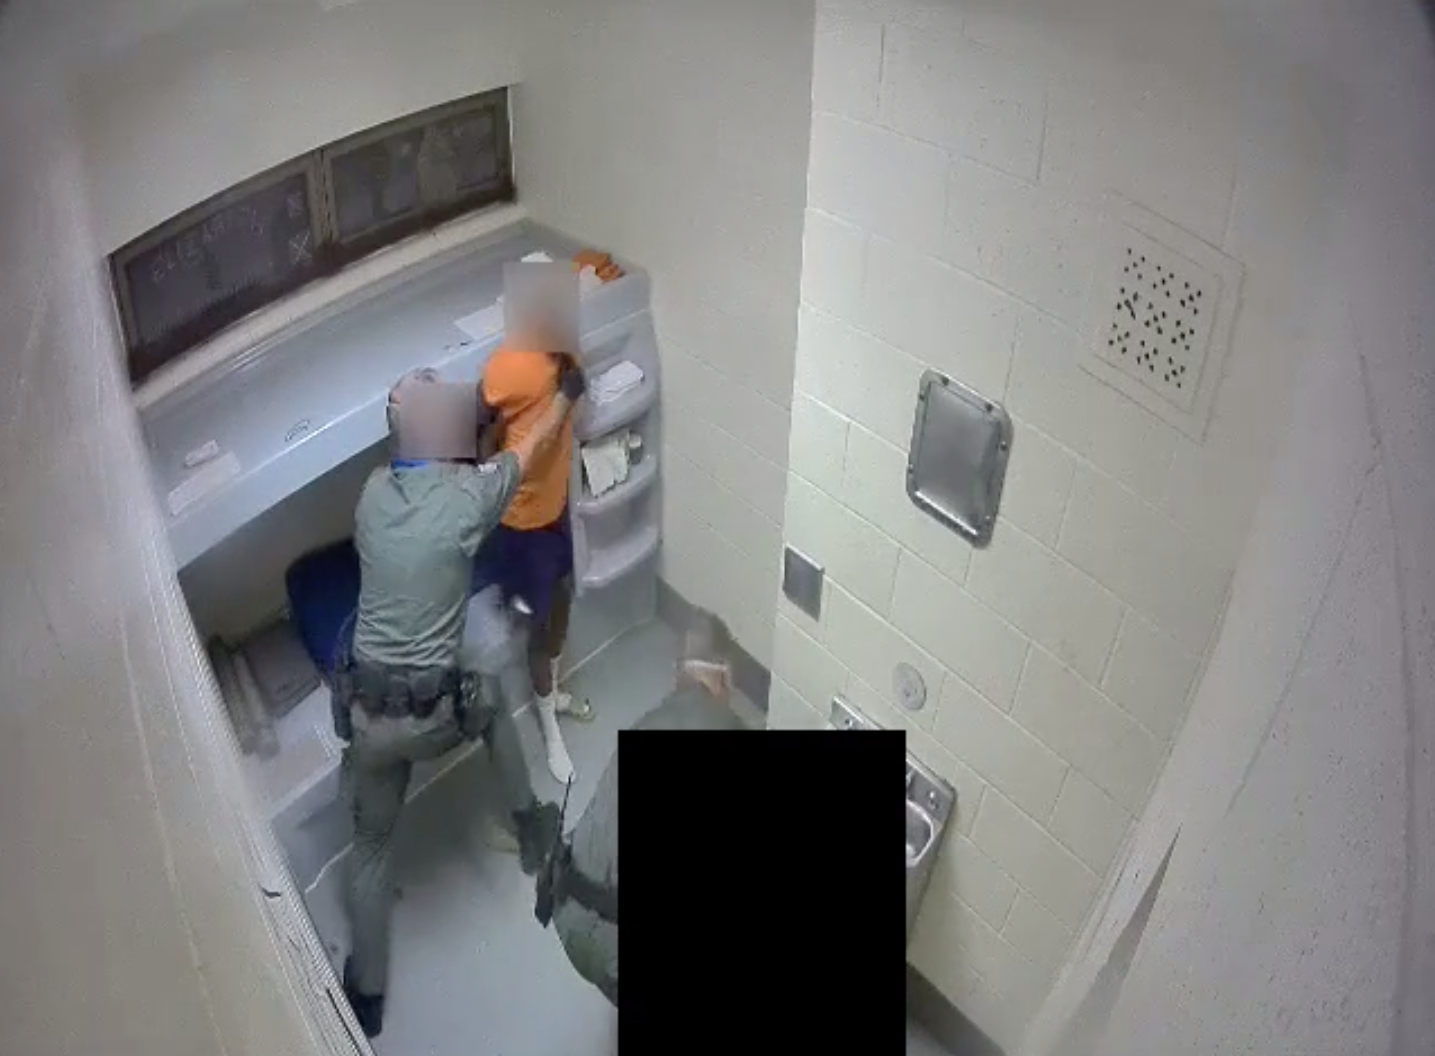 Jail surveillance video recording was redacted as to not reveal the locations and capabilities of the surveillance cameras in the Clark County jail which would jeopardize jail security.